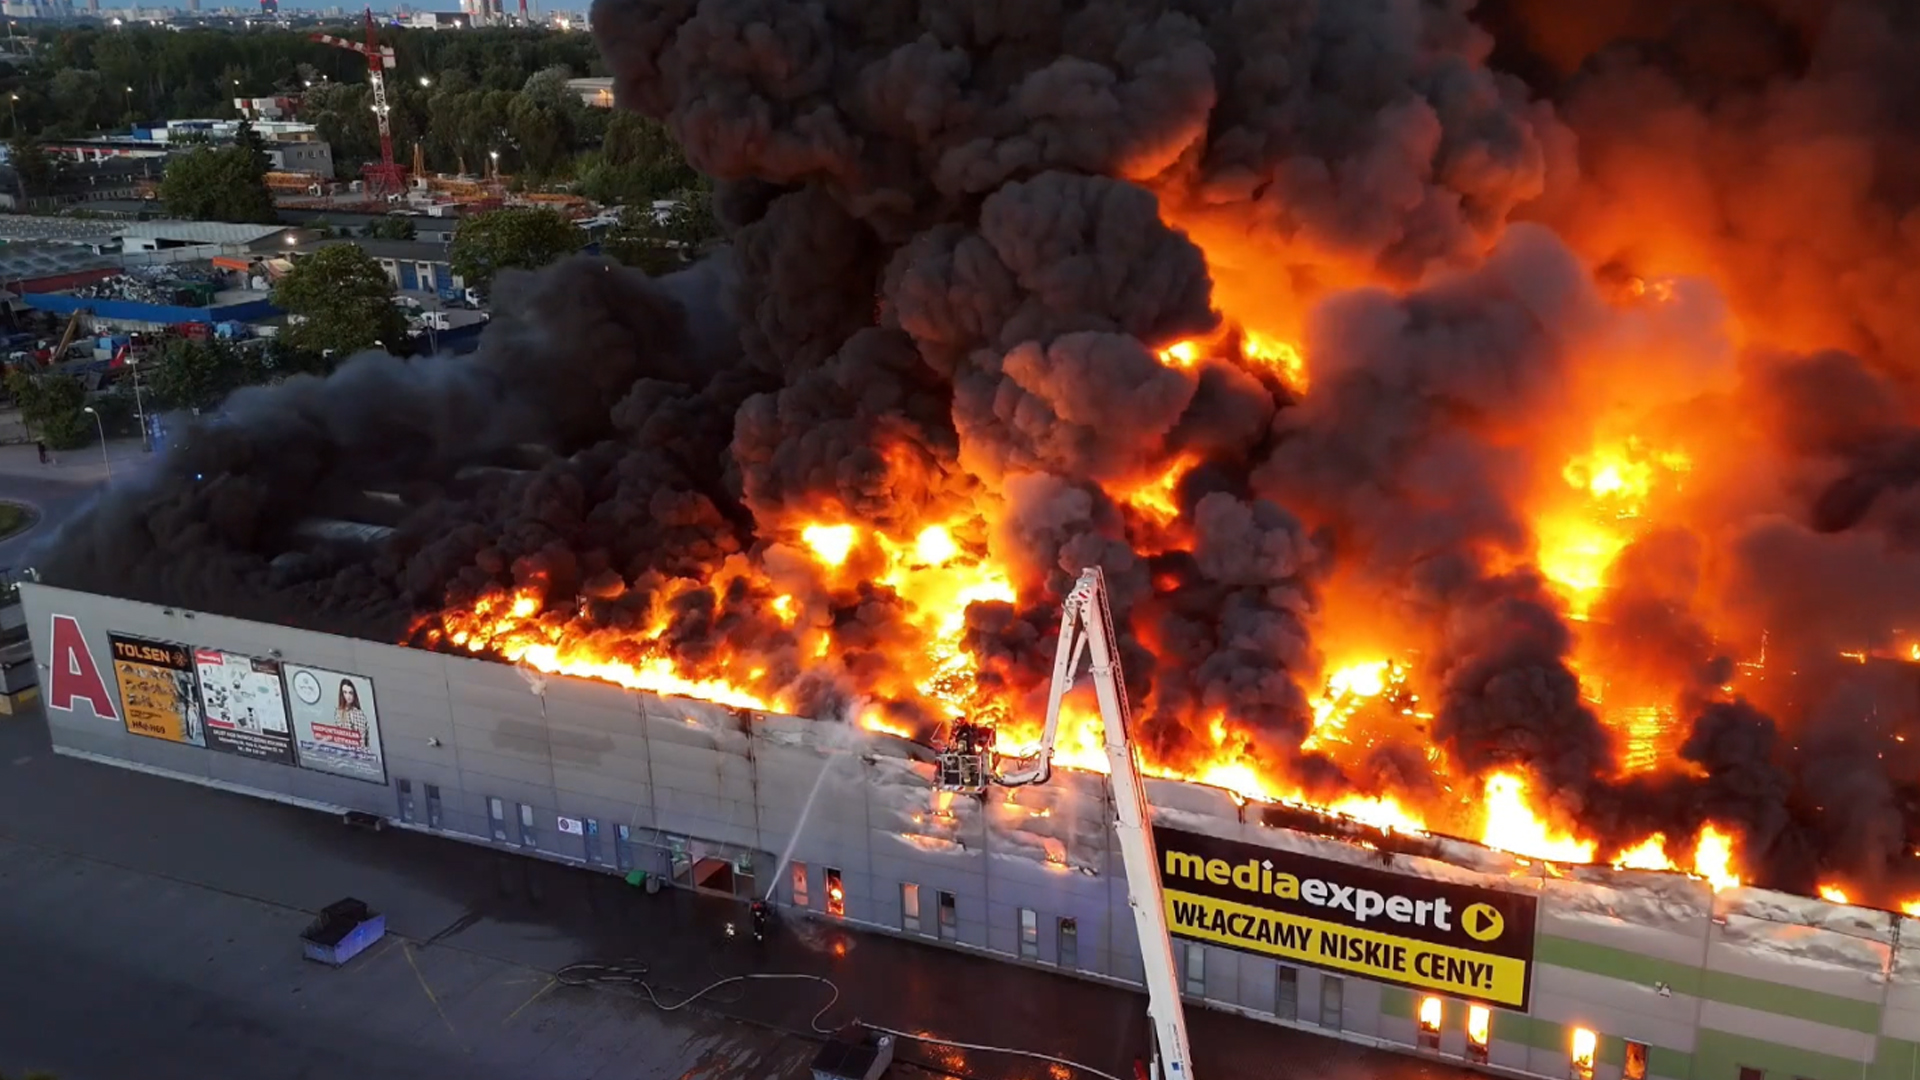 A shopping center with 1,400 stores is engulfed in flames in Poland